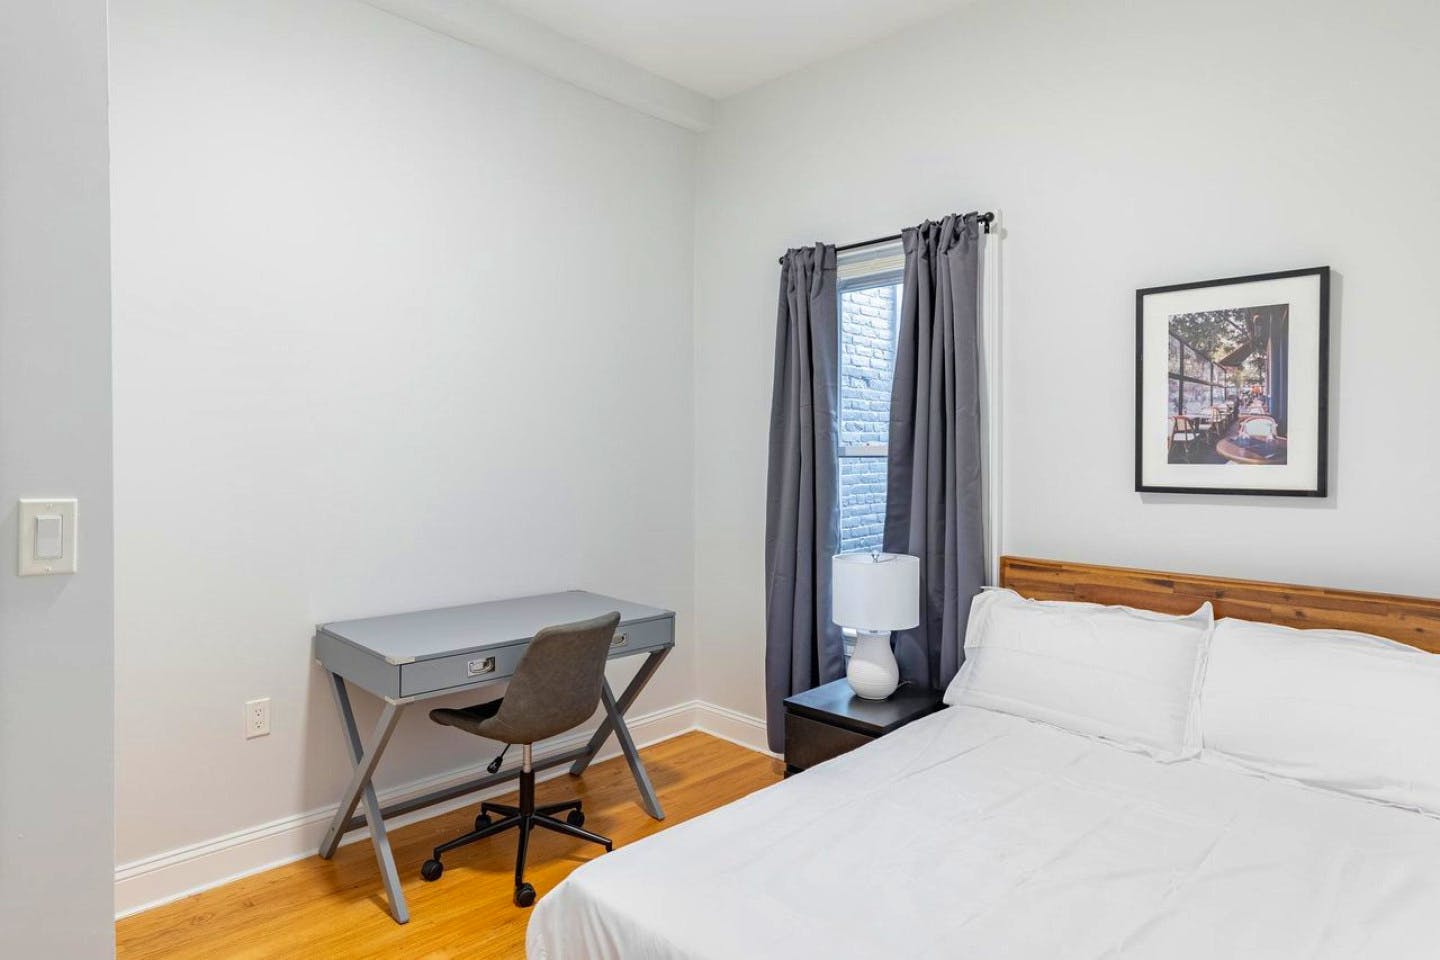 Newly Renovated Apt. with City Views 1 block away from Putnam Square Park